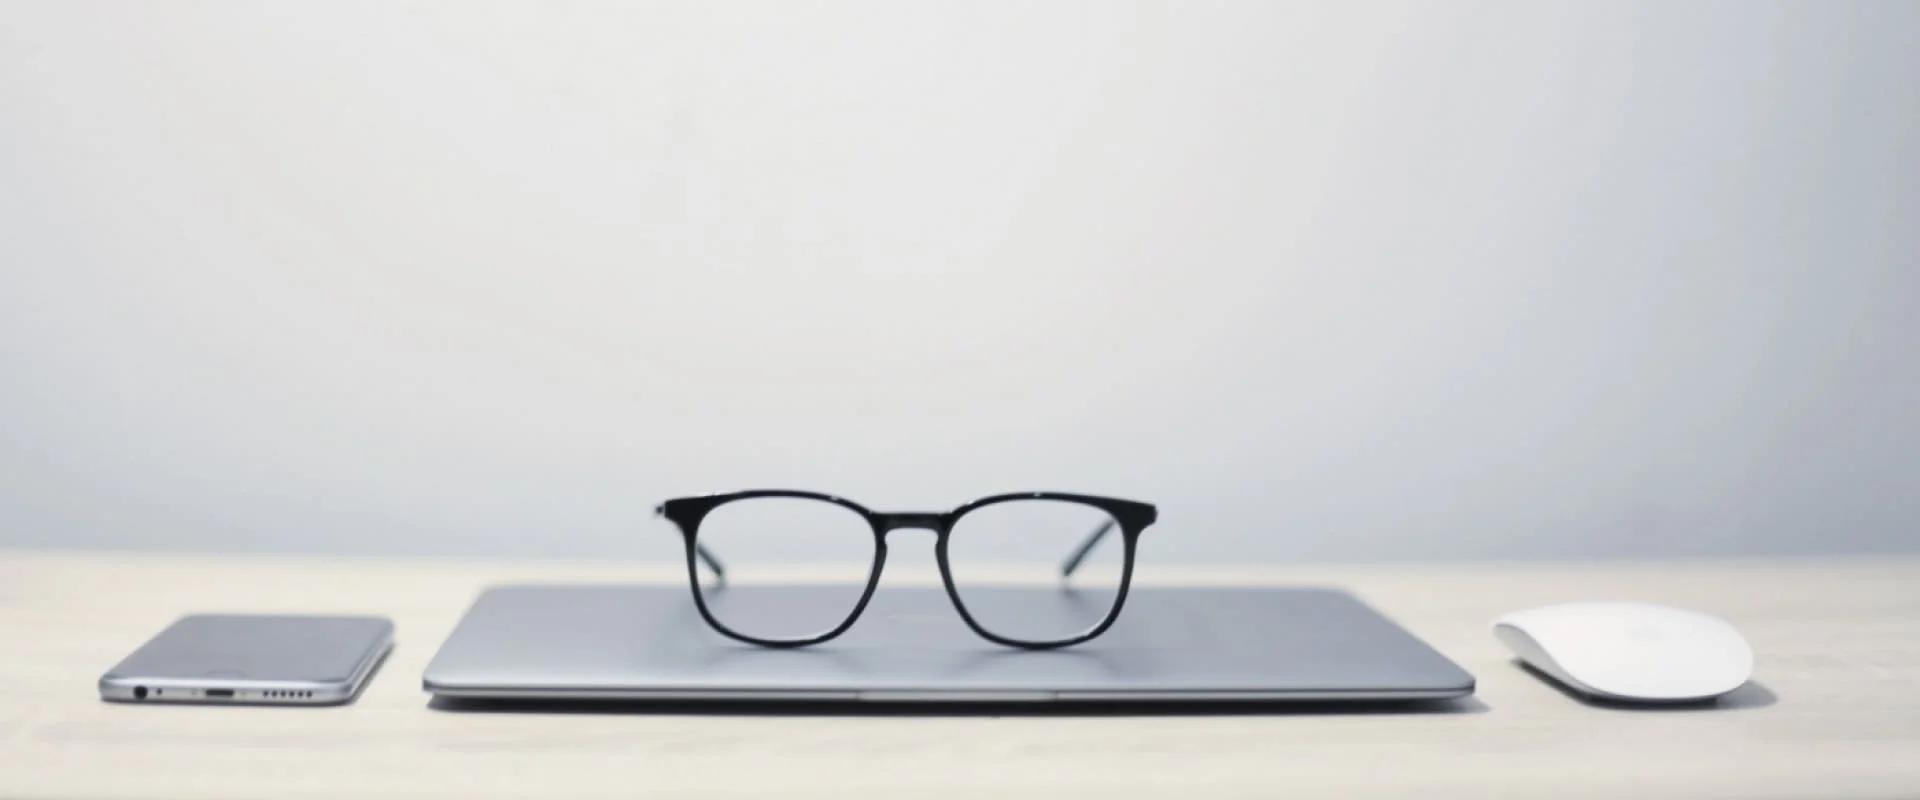 Glasses on a laptop